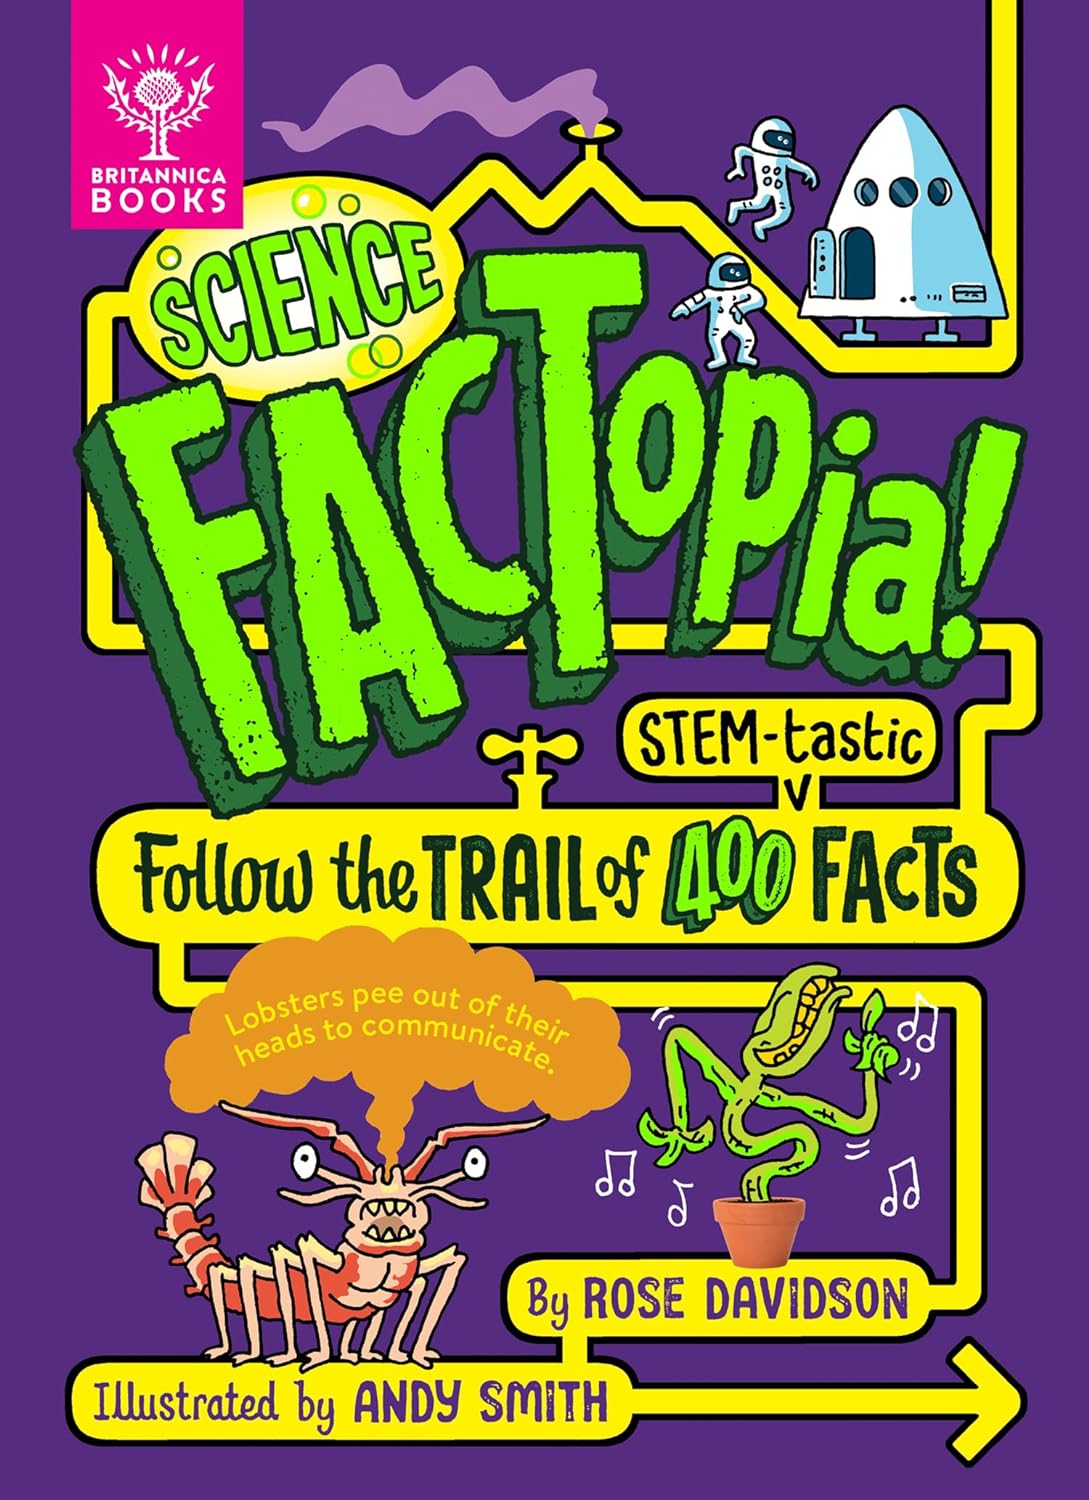 Science FACTopia Follow the trail of 400 STEM-tastic facts